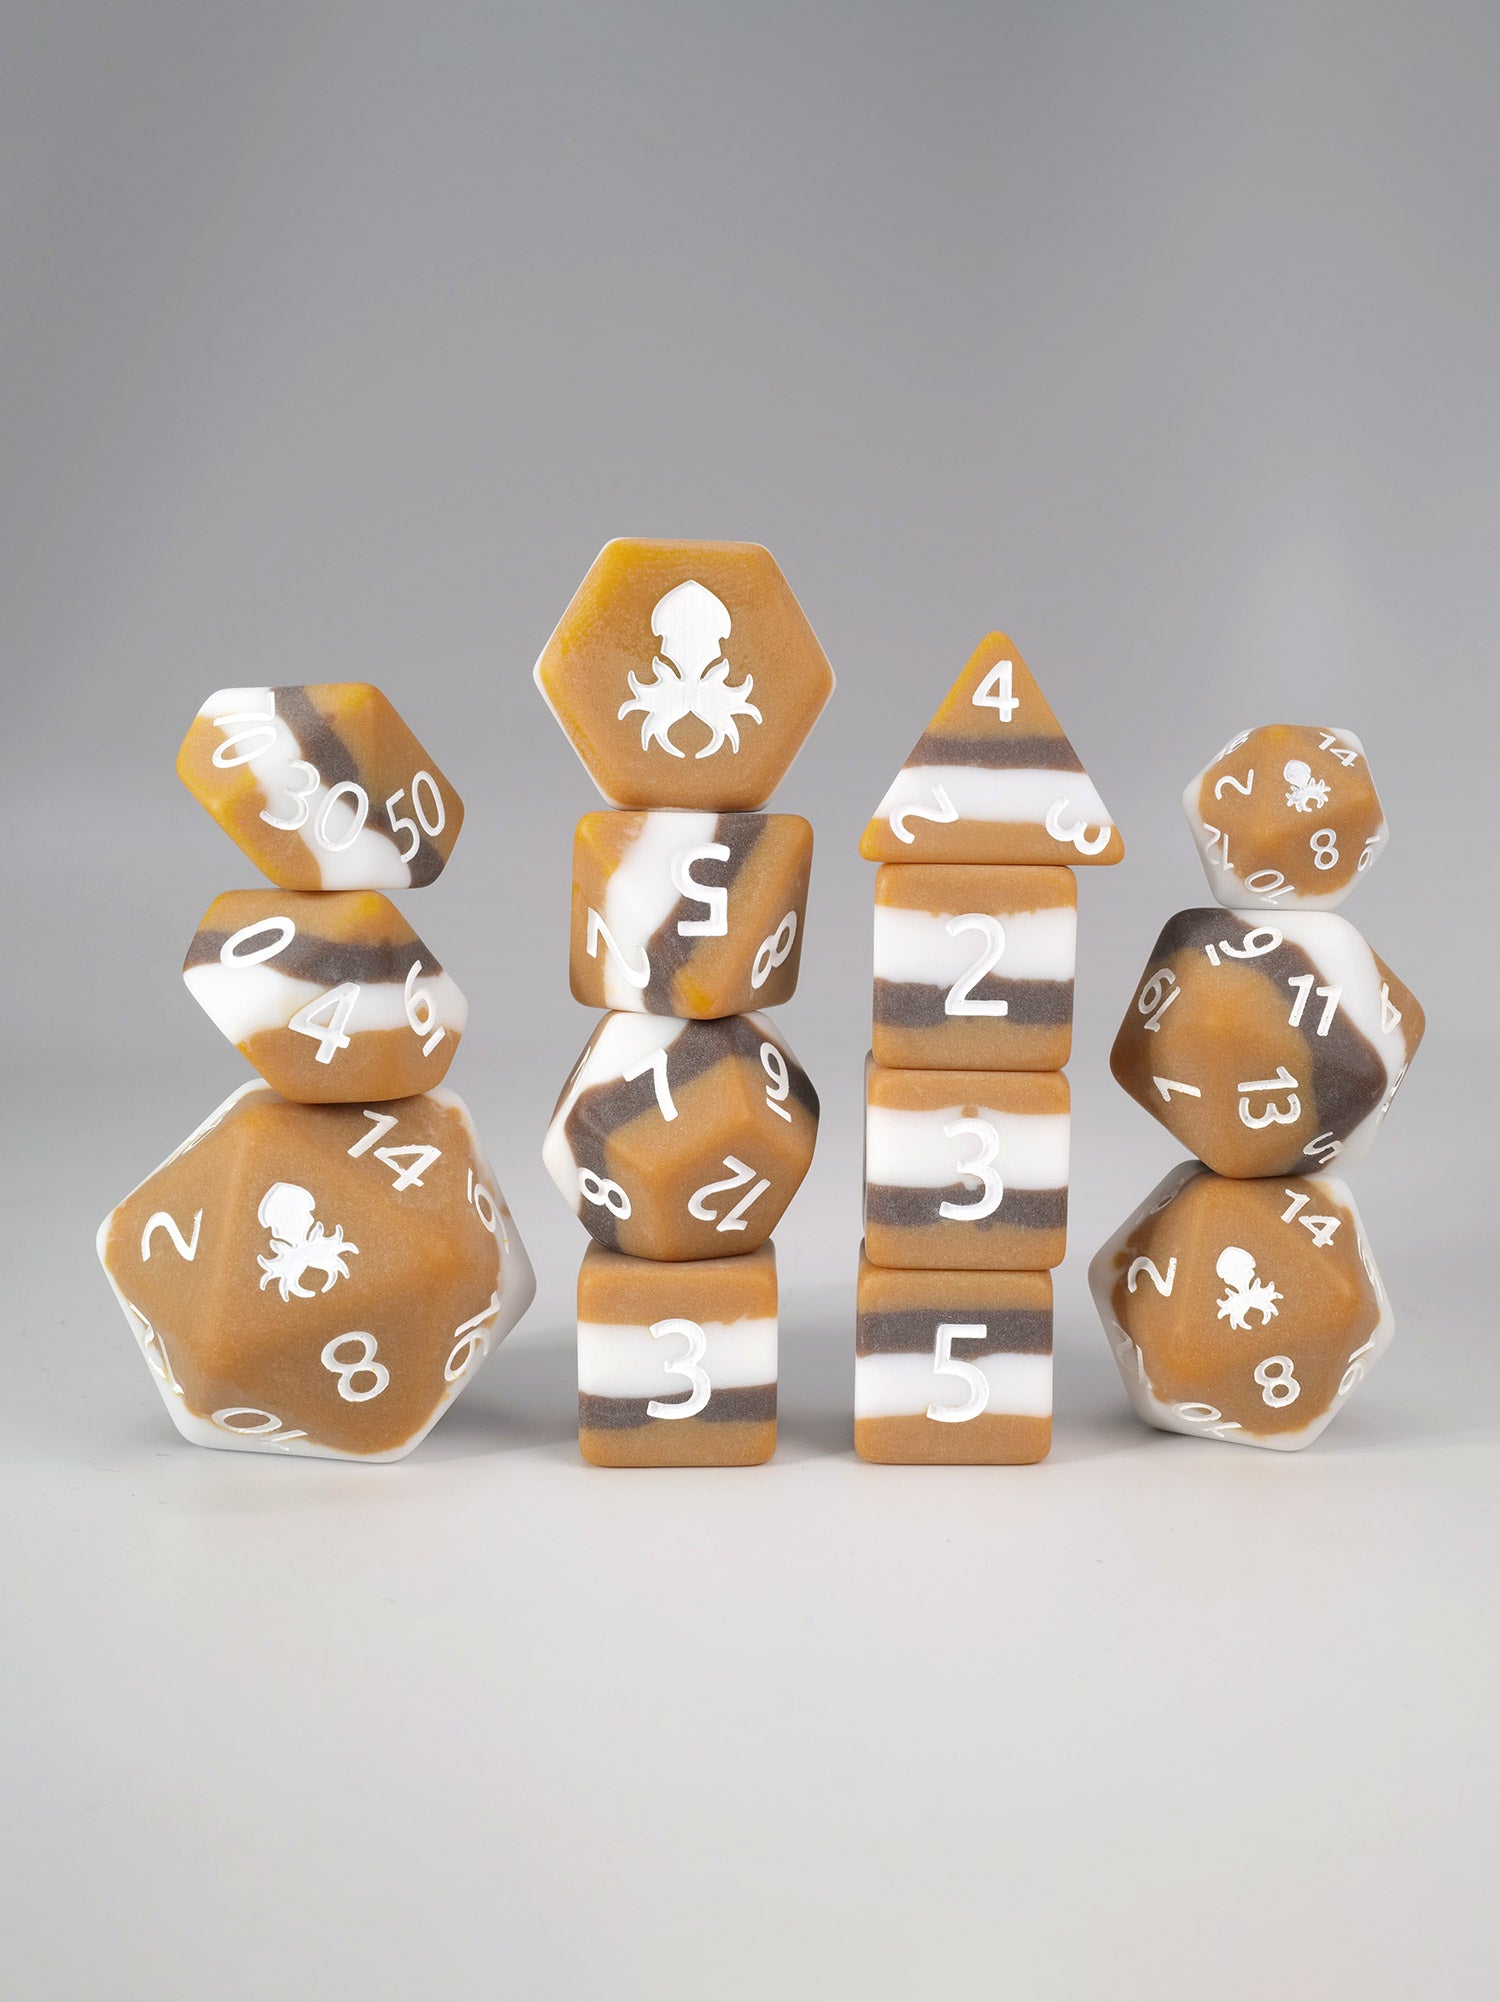 S'Mores 14pc Dice Set Inked in White